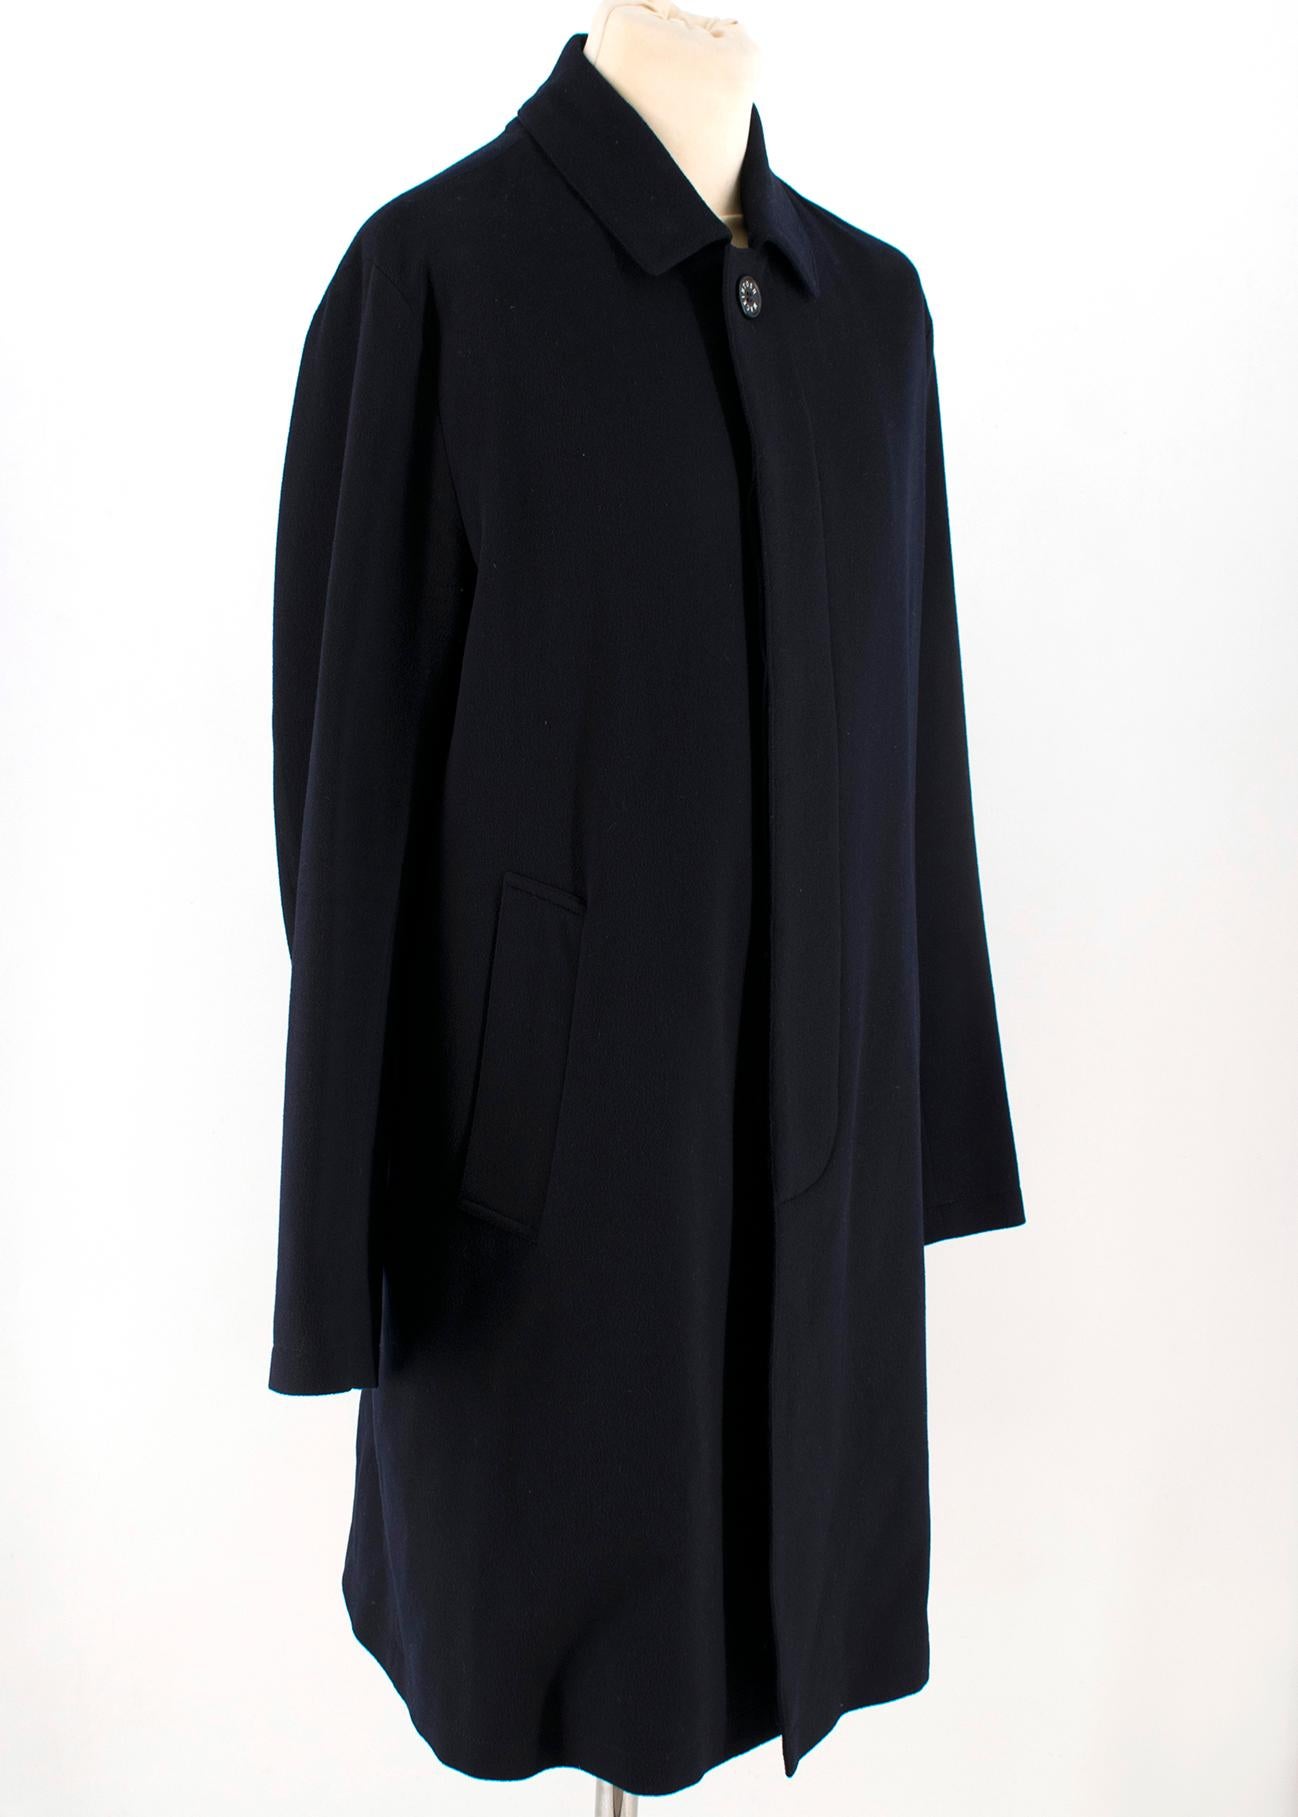 Navy Mackintosh Coat

Navy Coat
Made with Loro Piana Cashmere
Single breasted
Long sleeves
Two side pockets

Measurements are taken laying flat, seam to seam. 

Shoulder: 49 cm
Chest: 54 cm
Length: 84 cm
